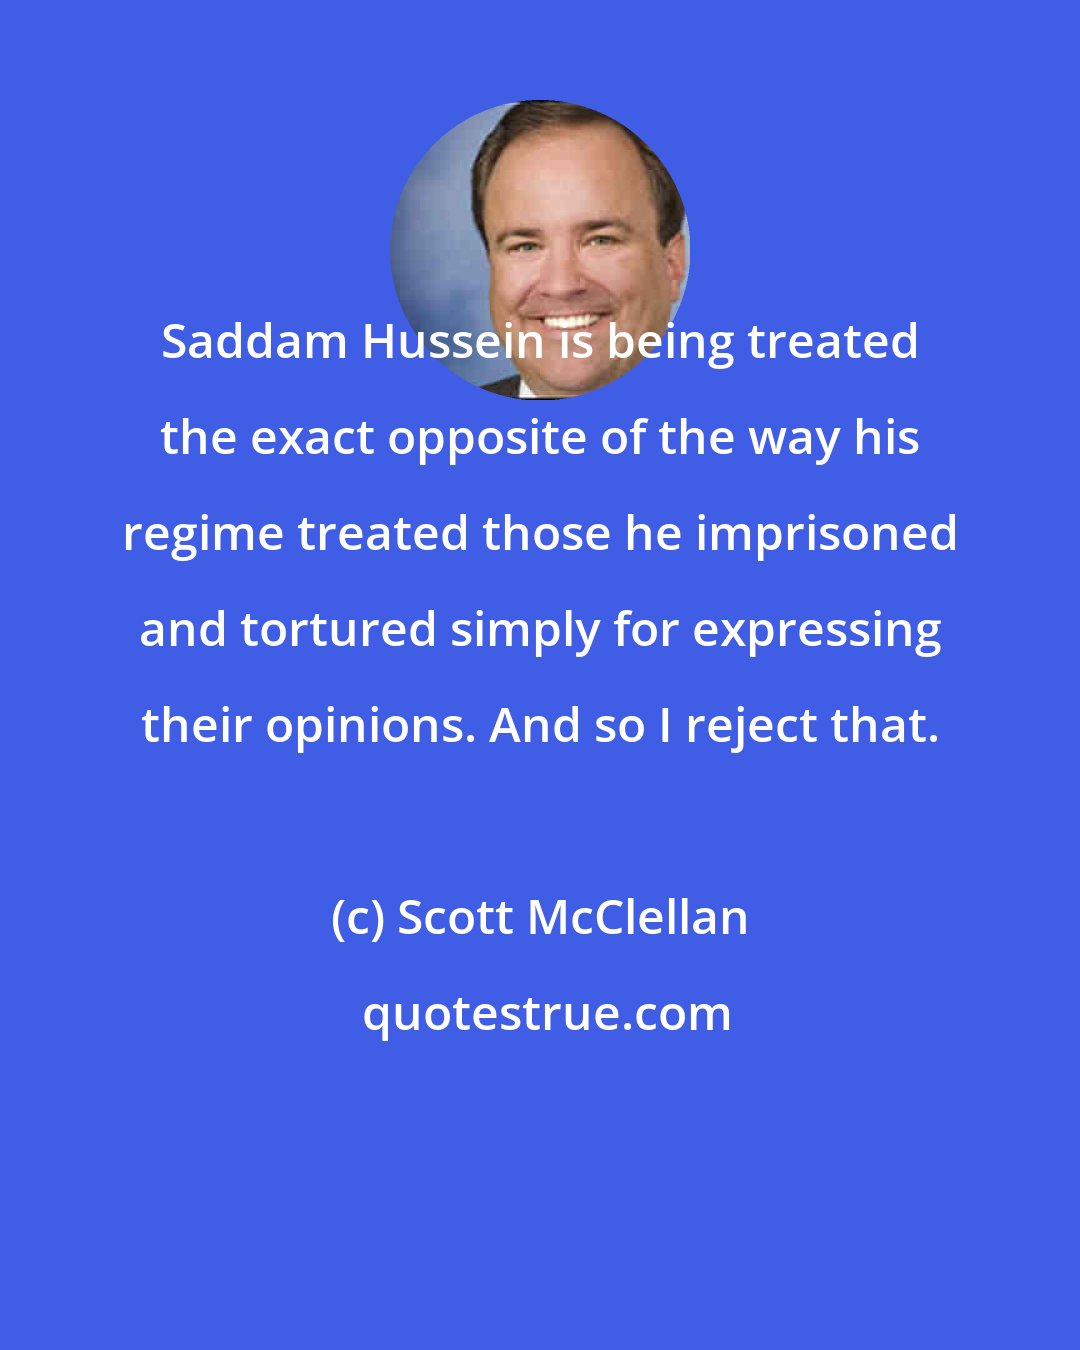 Scott McClellan: Saddam Hussein is being treated the exact opposite of the way his regime treated those he imprisoned and tortured simply for expressing their opinions. And so I reject that.